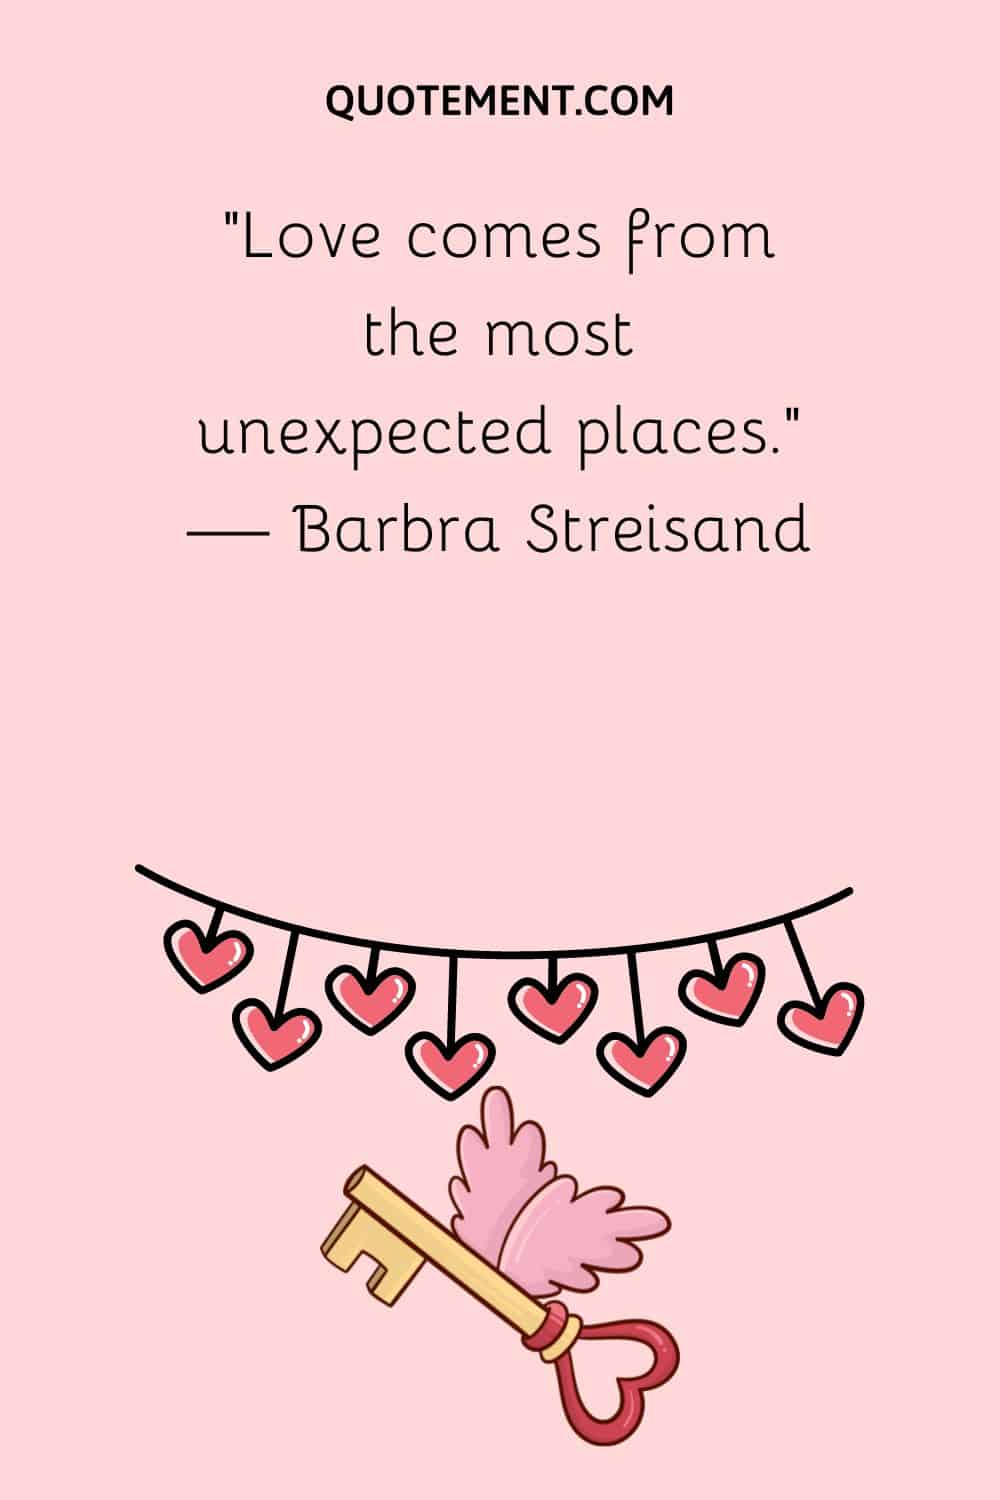 “Love comes from the most unexpected places.” — Barbra Streisand